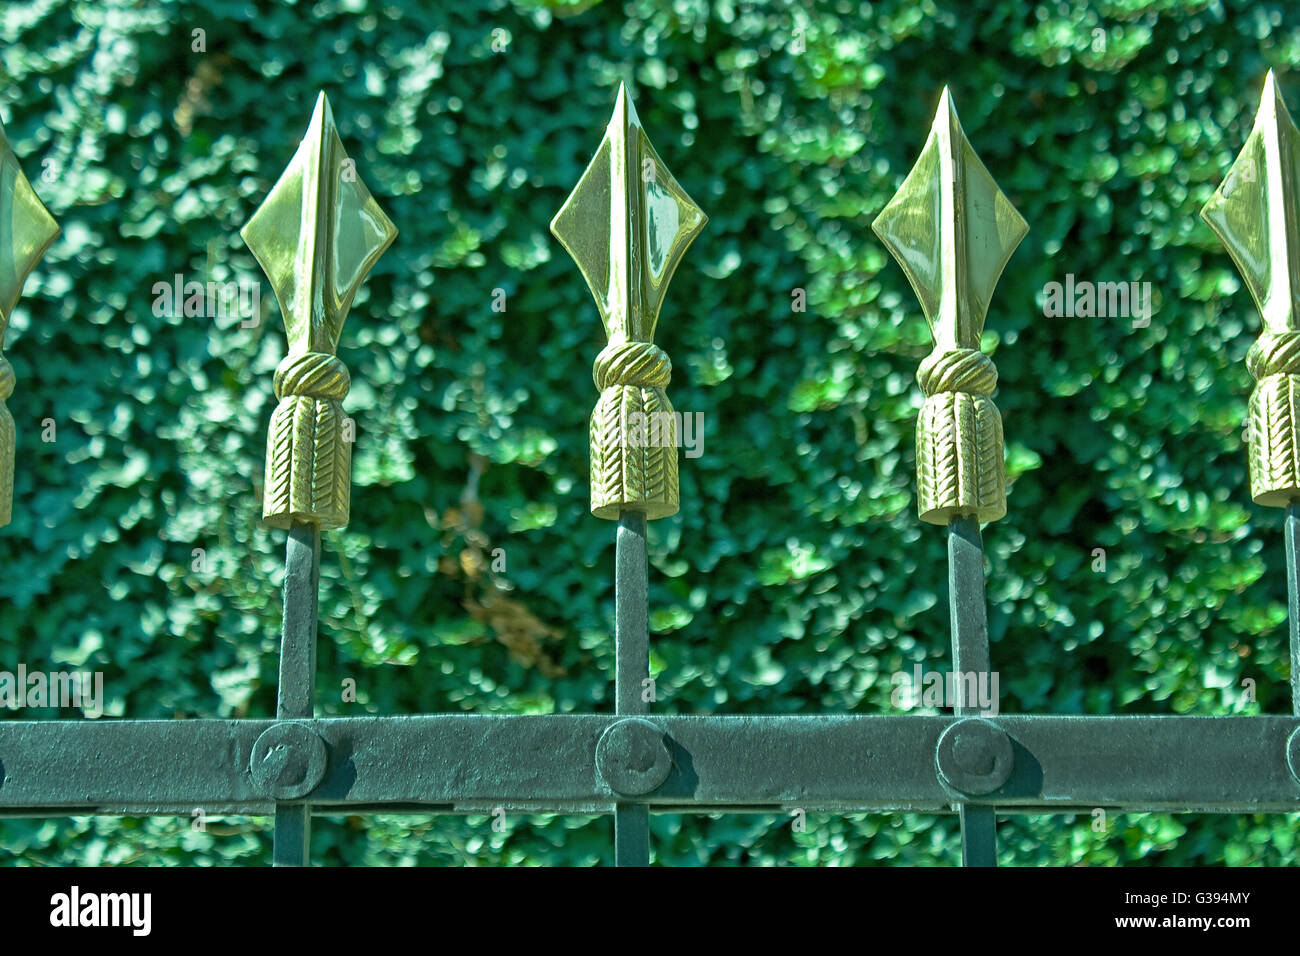 Golden spikes on iron fence over green plant Stock Photo